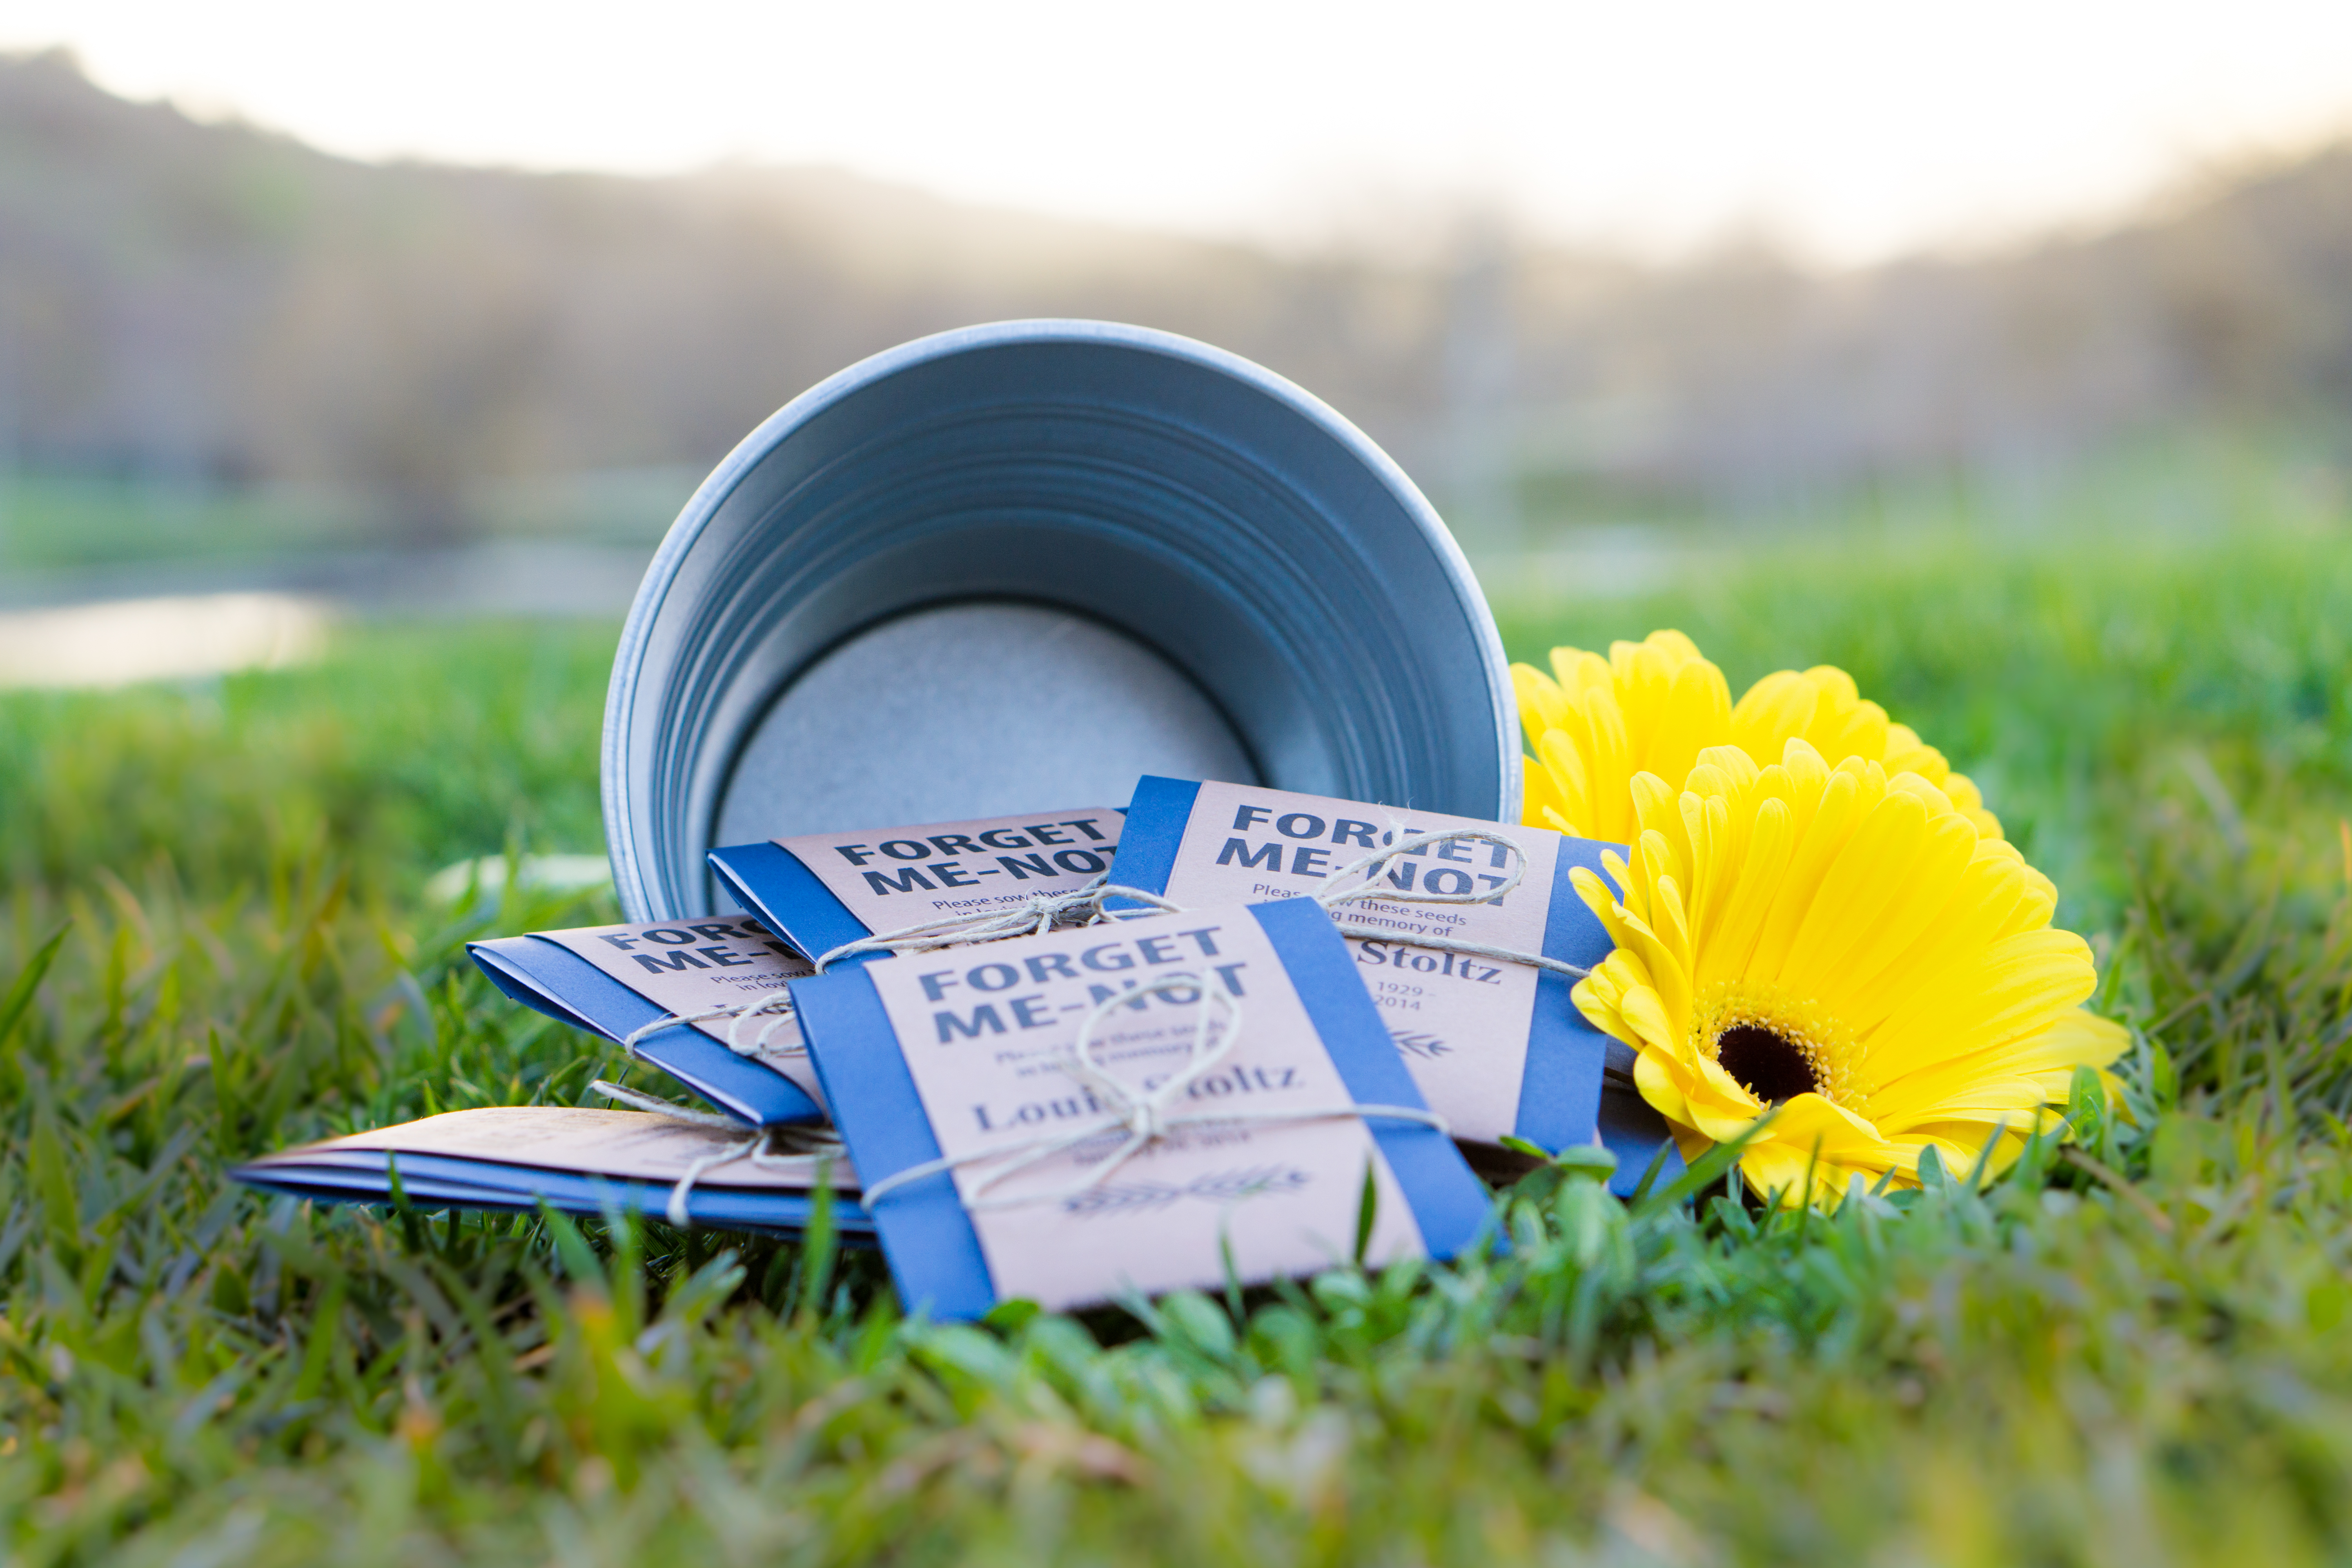 Forget me not memorial flower seed packets in tin can by Gloria's Garden